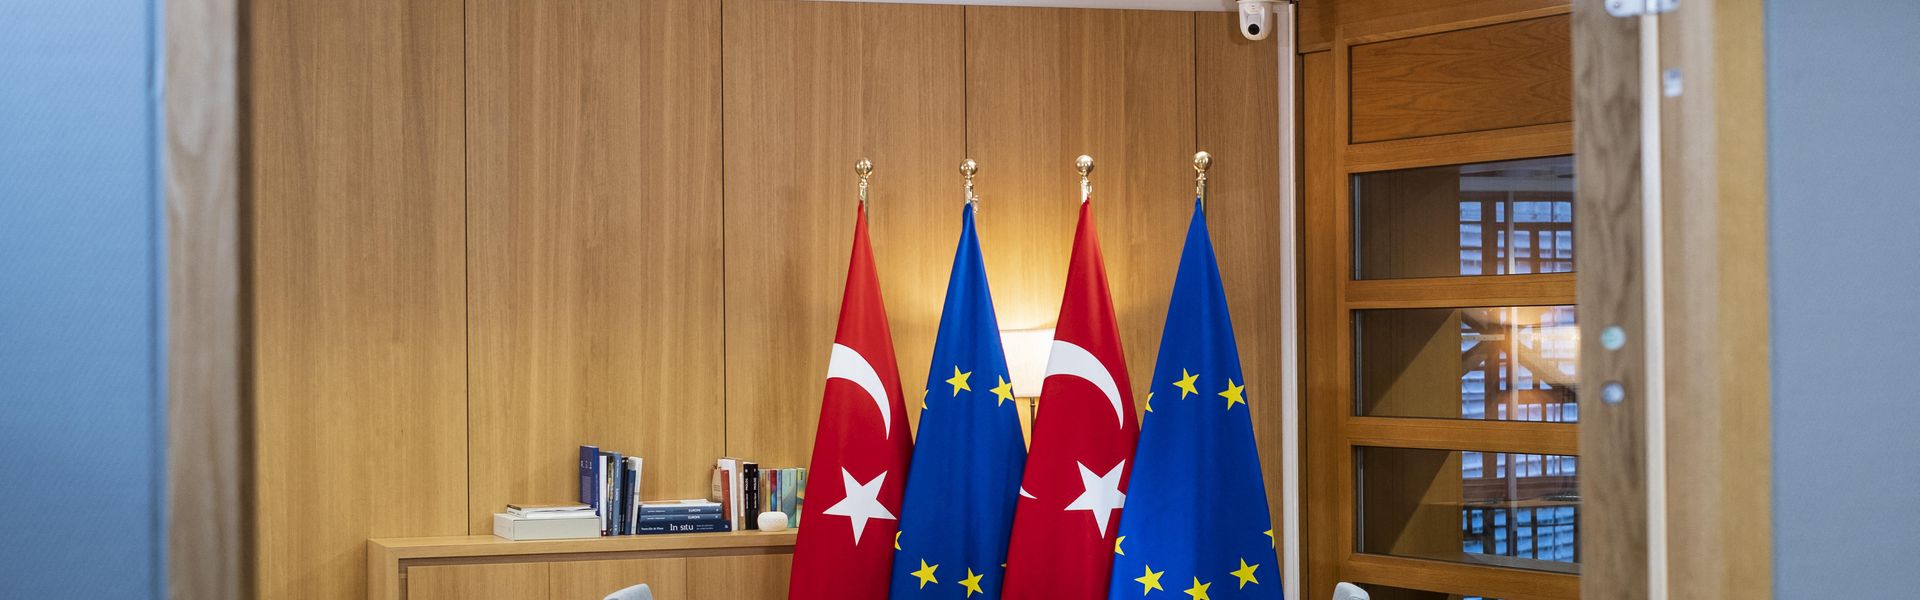 EU Council headquarter: Turkish President and the EU Leaders will talk about the crisis situation at the Greek/Turkish border and the situation in Syria